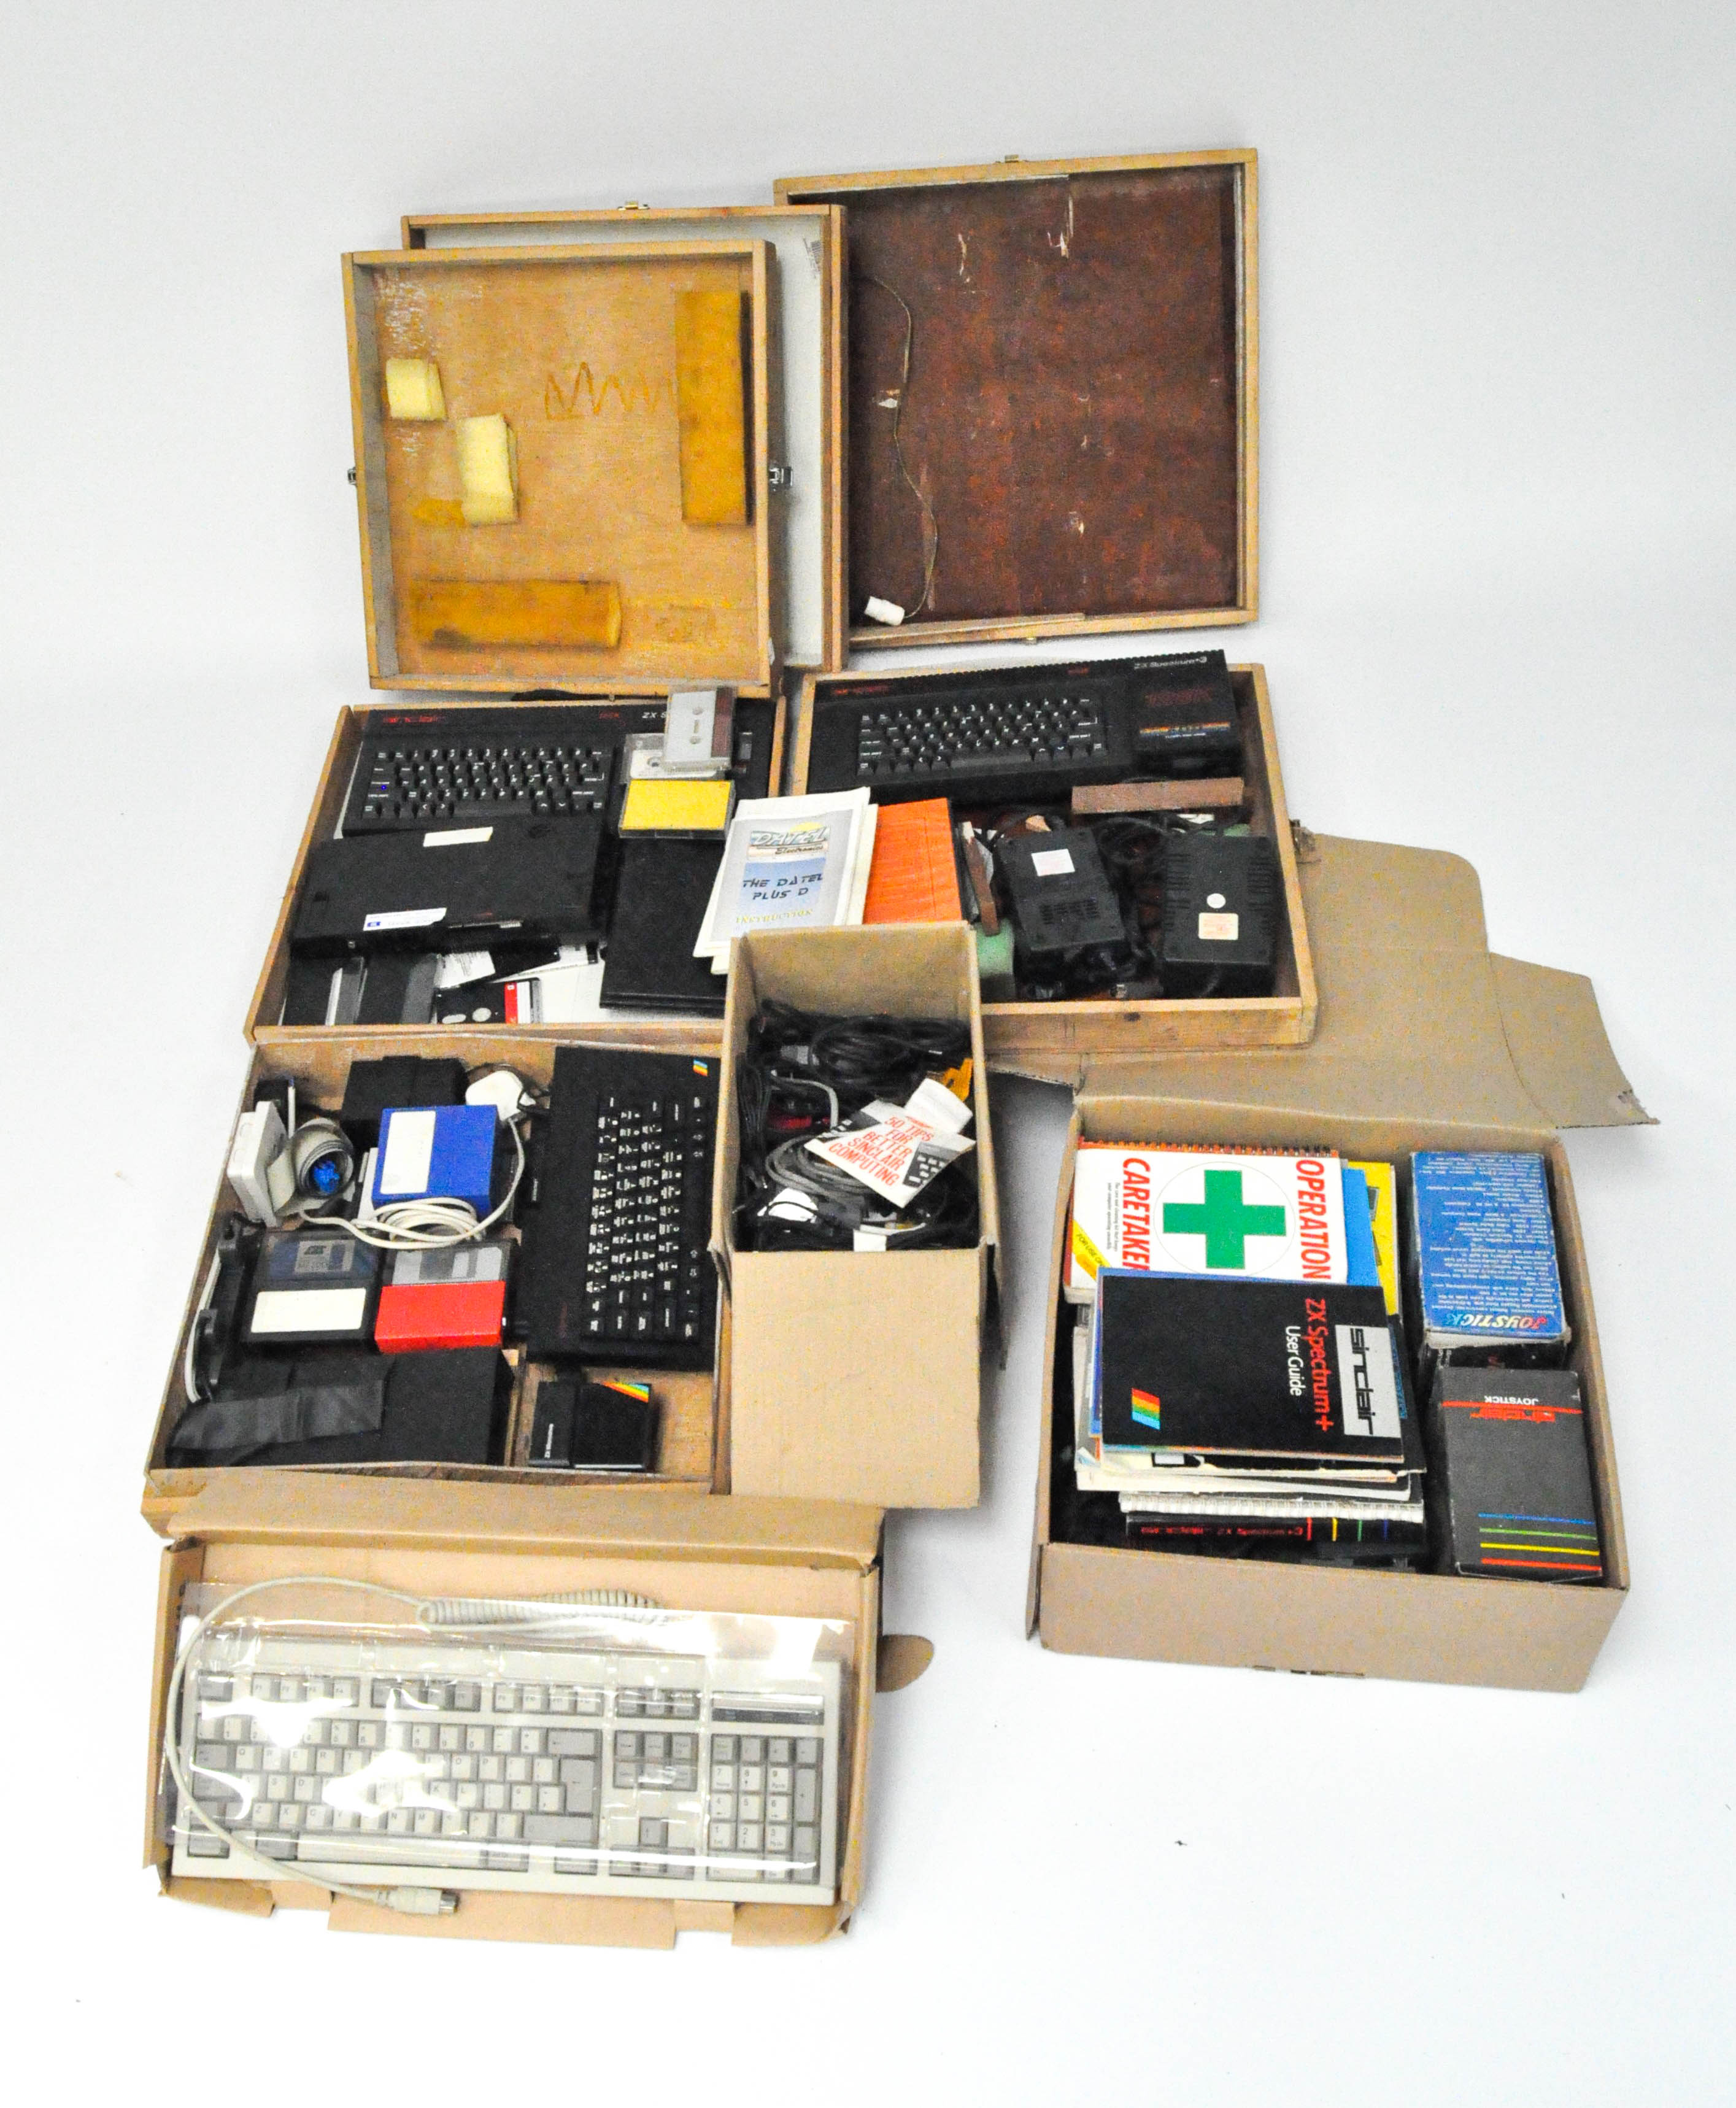 A selection of vintage ZX spectrum's and related equipment, disks, books, accessories and more